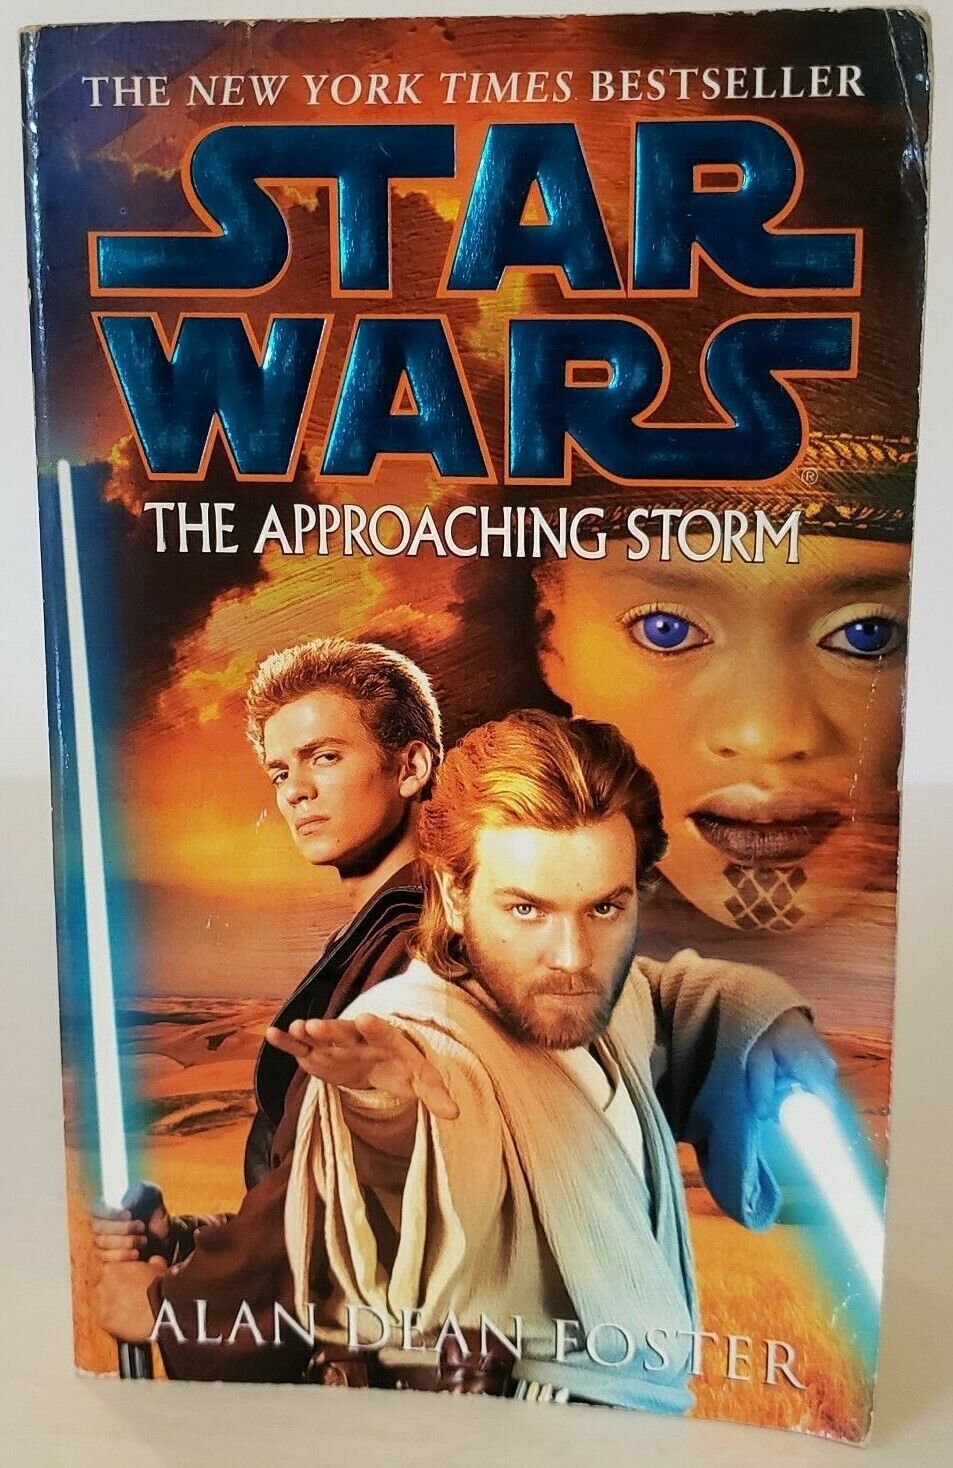 Star Wars Paperback Book: The Approaching Storm by Alan Dean Foster